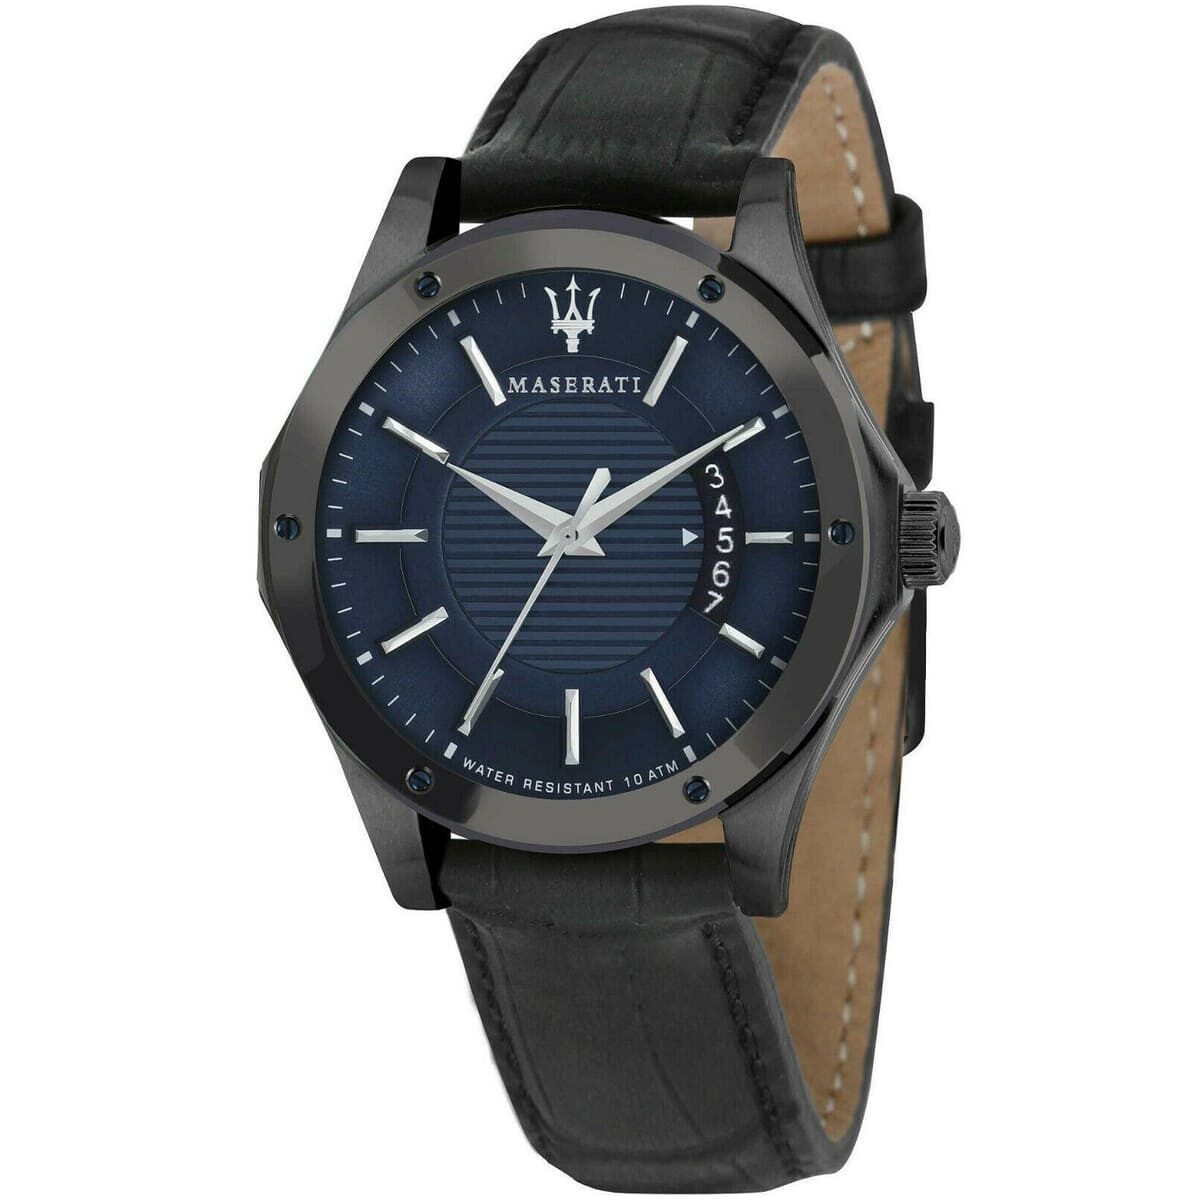 r8851127002-maserati-watch-men-blue-dial-leather-black-strap-quartz-battery-analog-three-hand-water-resistant-10-atmcircuito